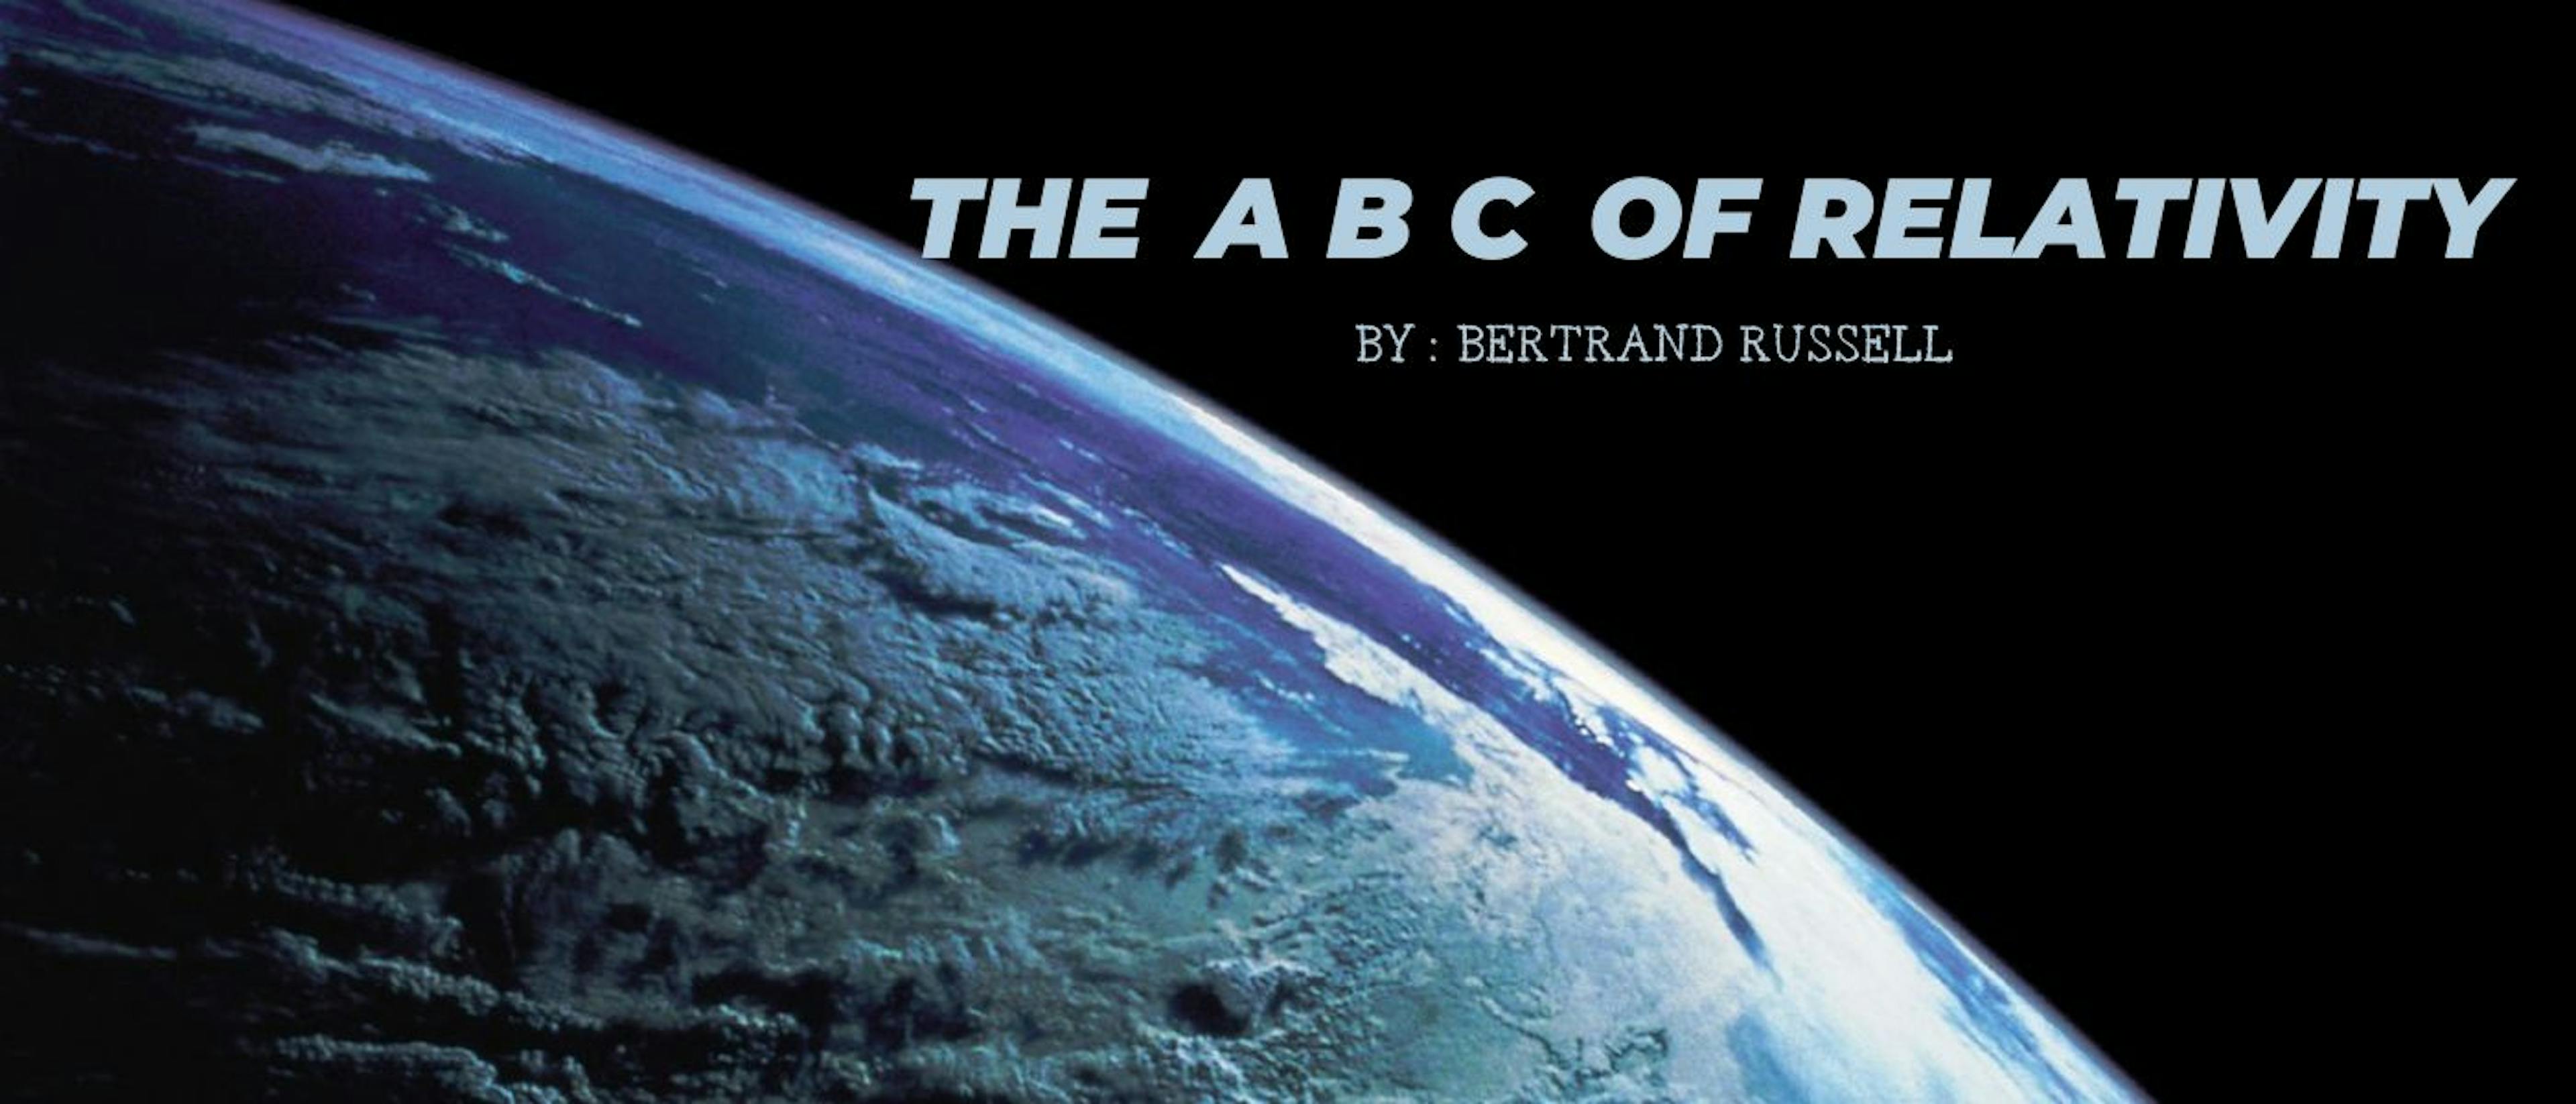 featured image - The A B C of Relativity, by Bertrand Russell - Table of Links